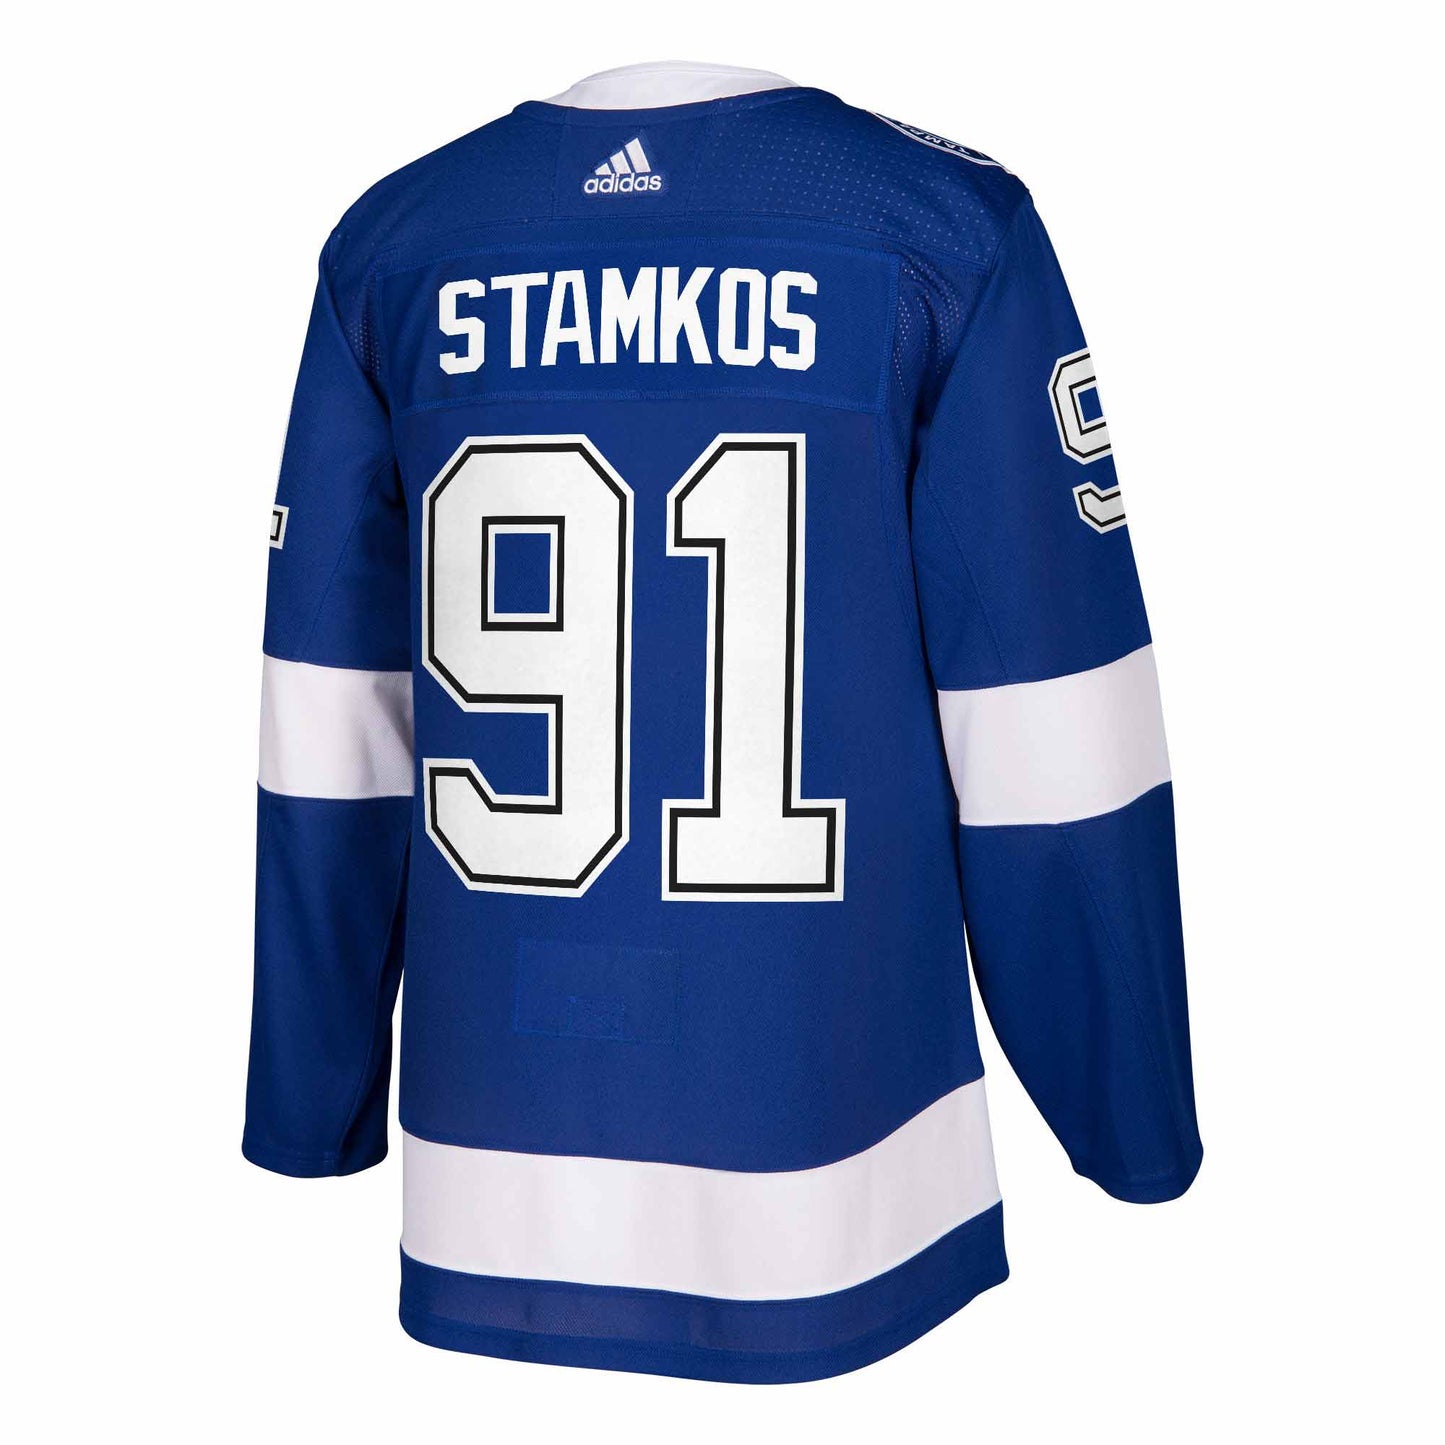 Steven Stamkos Tampa Bay Lightning adidas Authentic Player Jersey - Blue